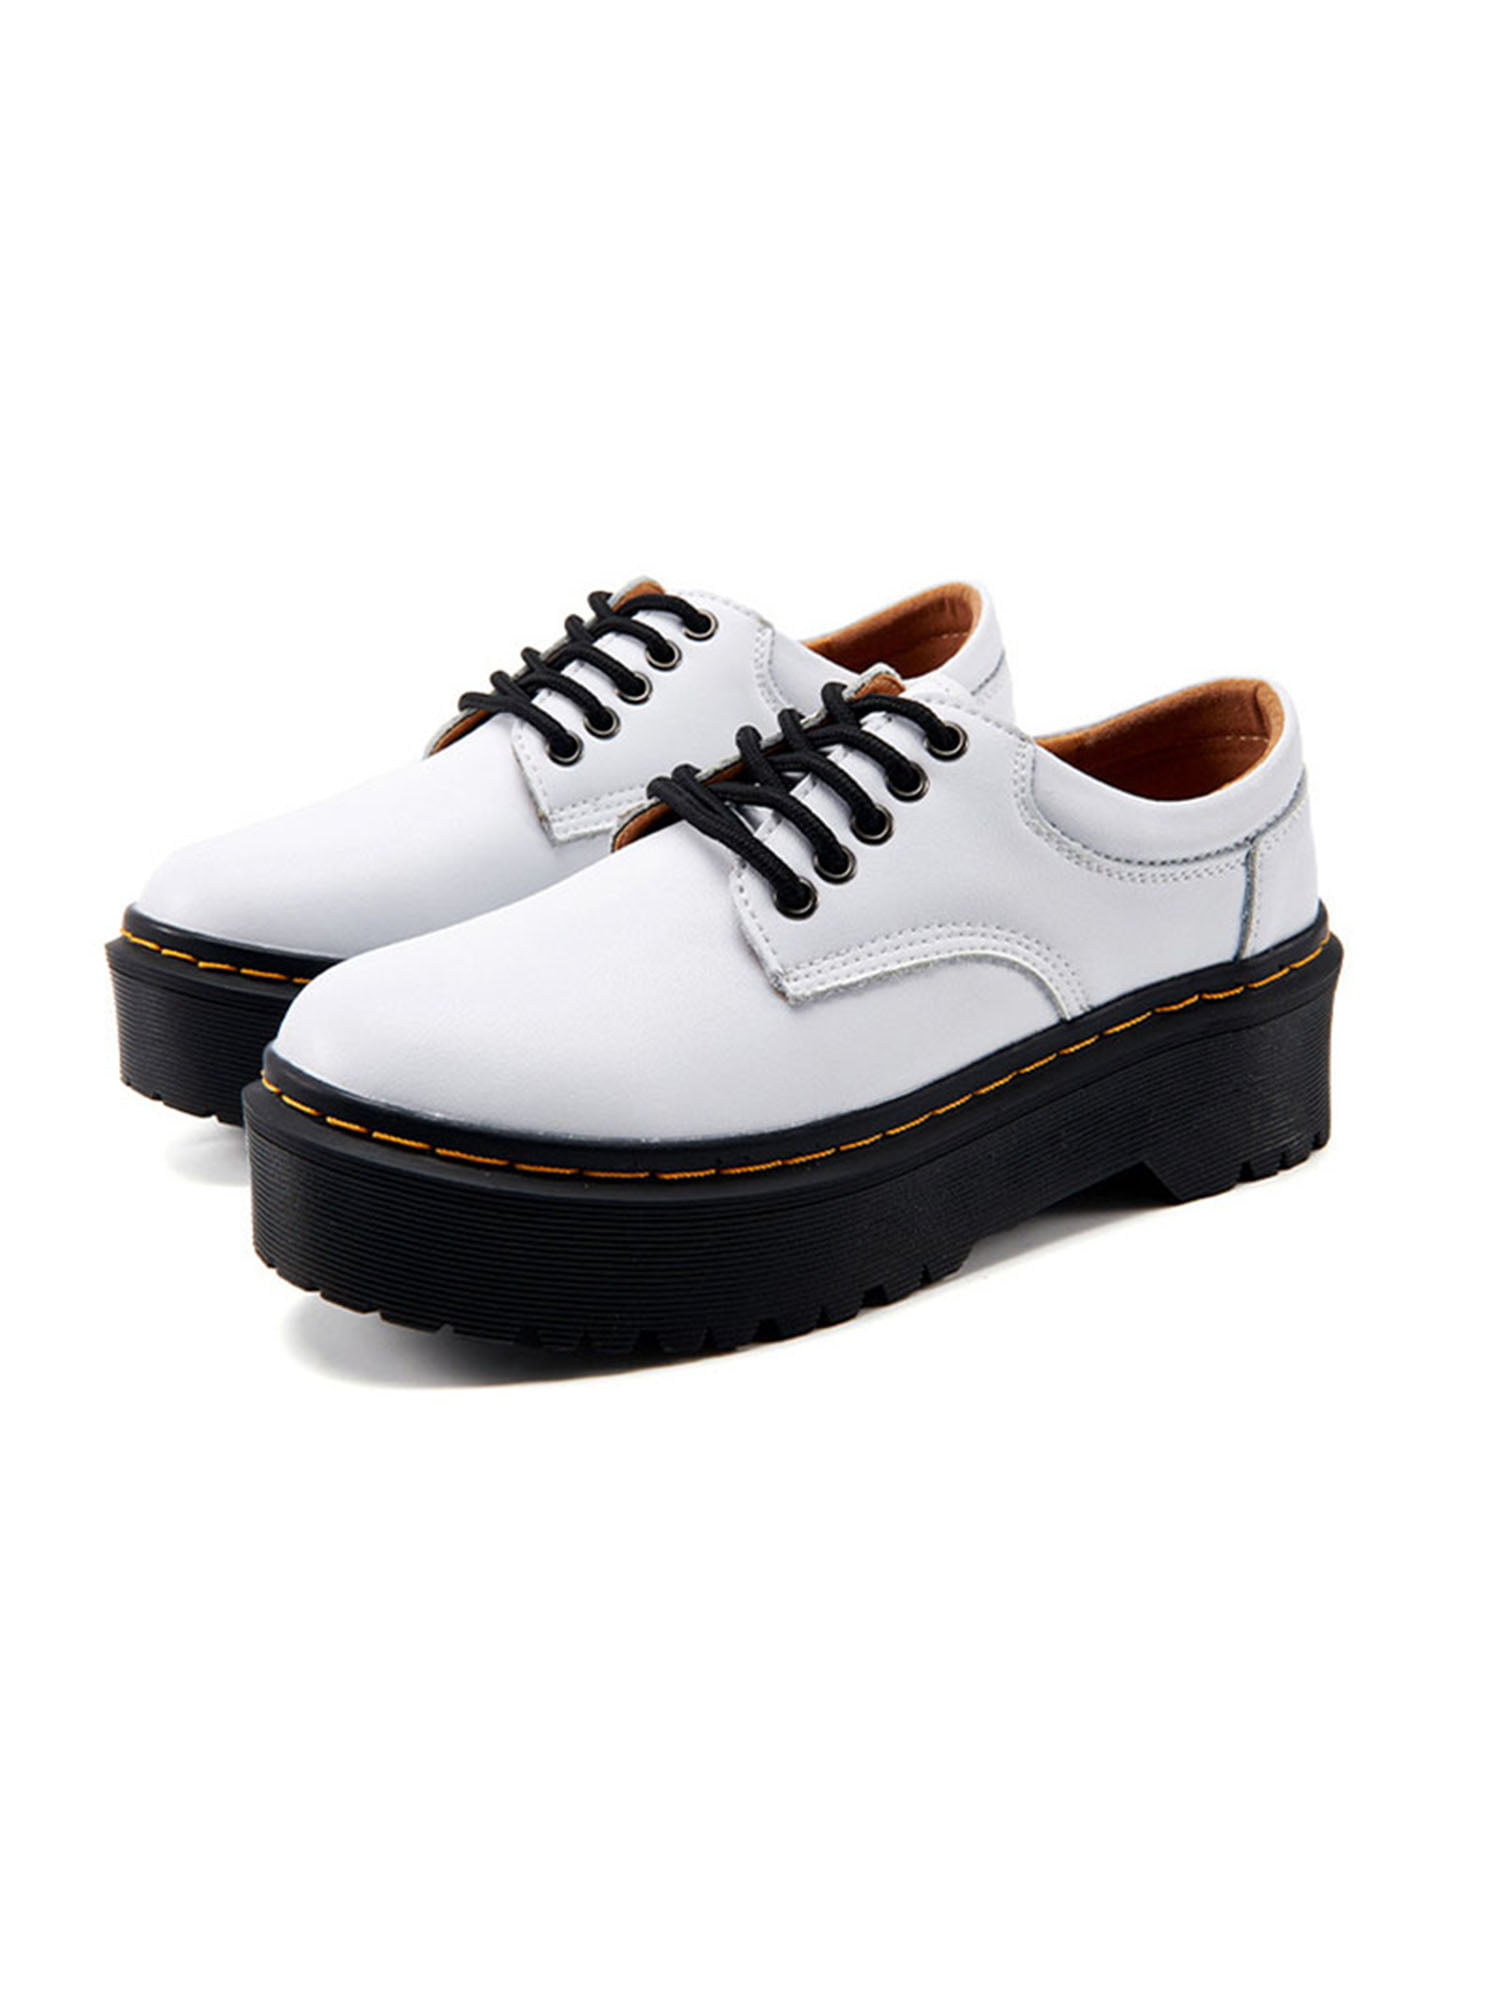 Details about   Retro Women Real Leather Round Toe Oxfords Lace Up Casual Shoes Breathable Shoes